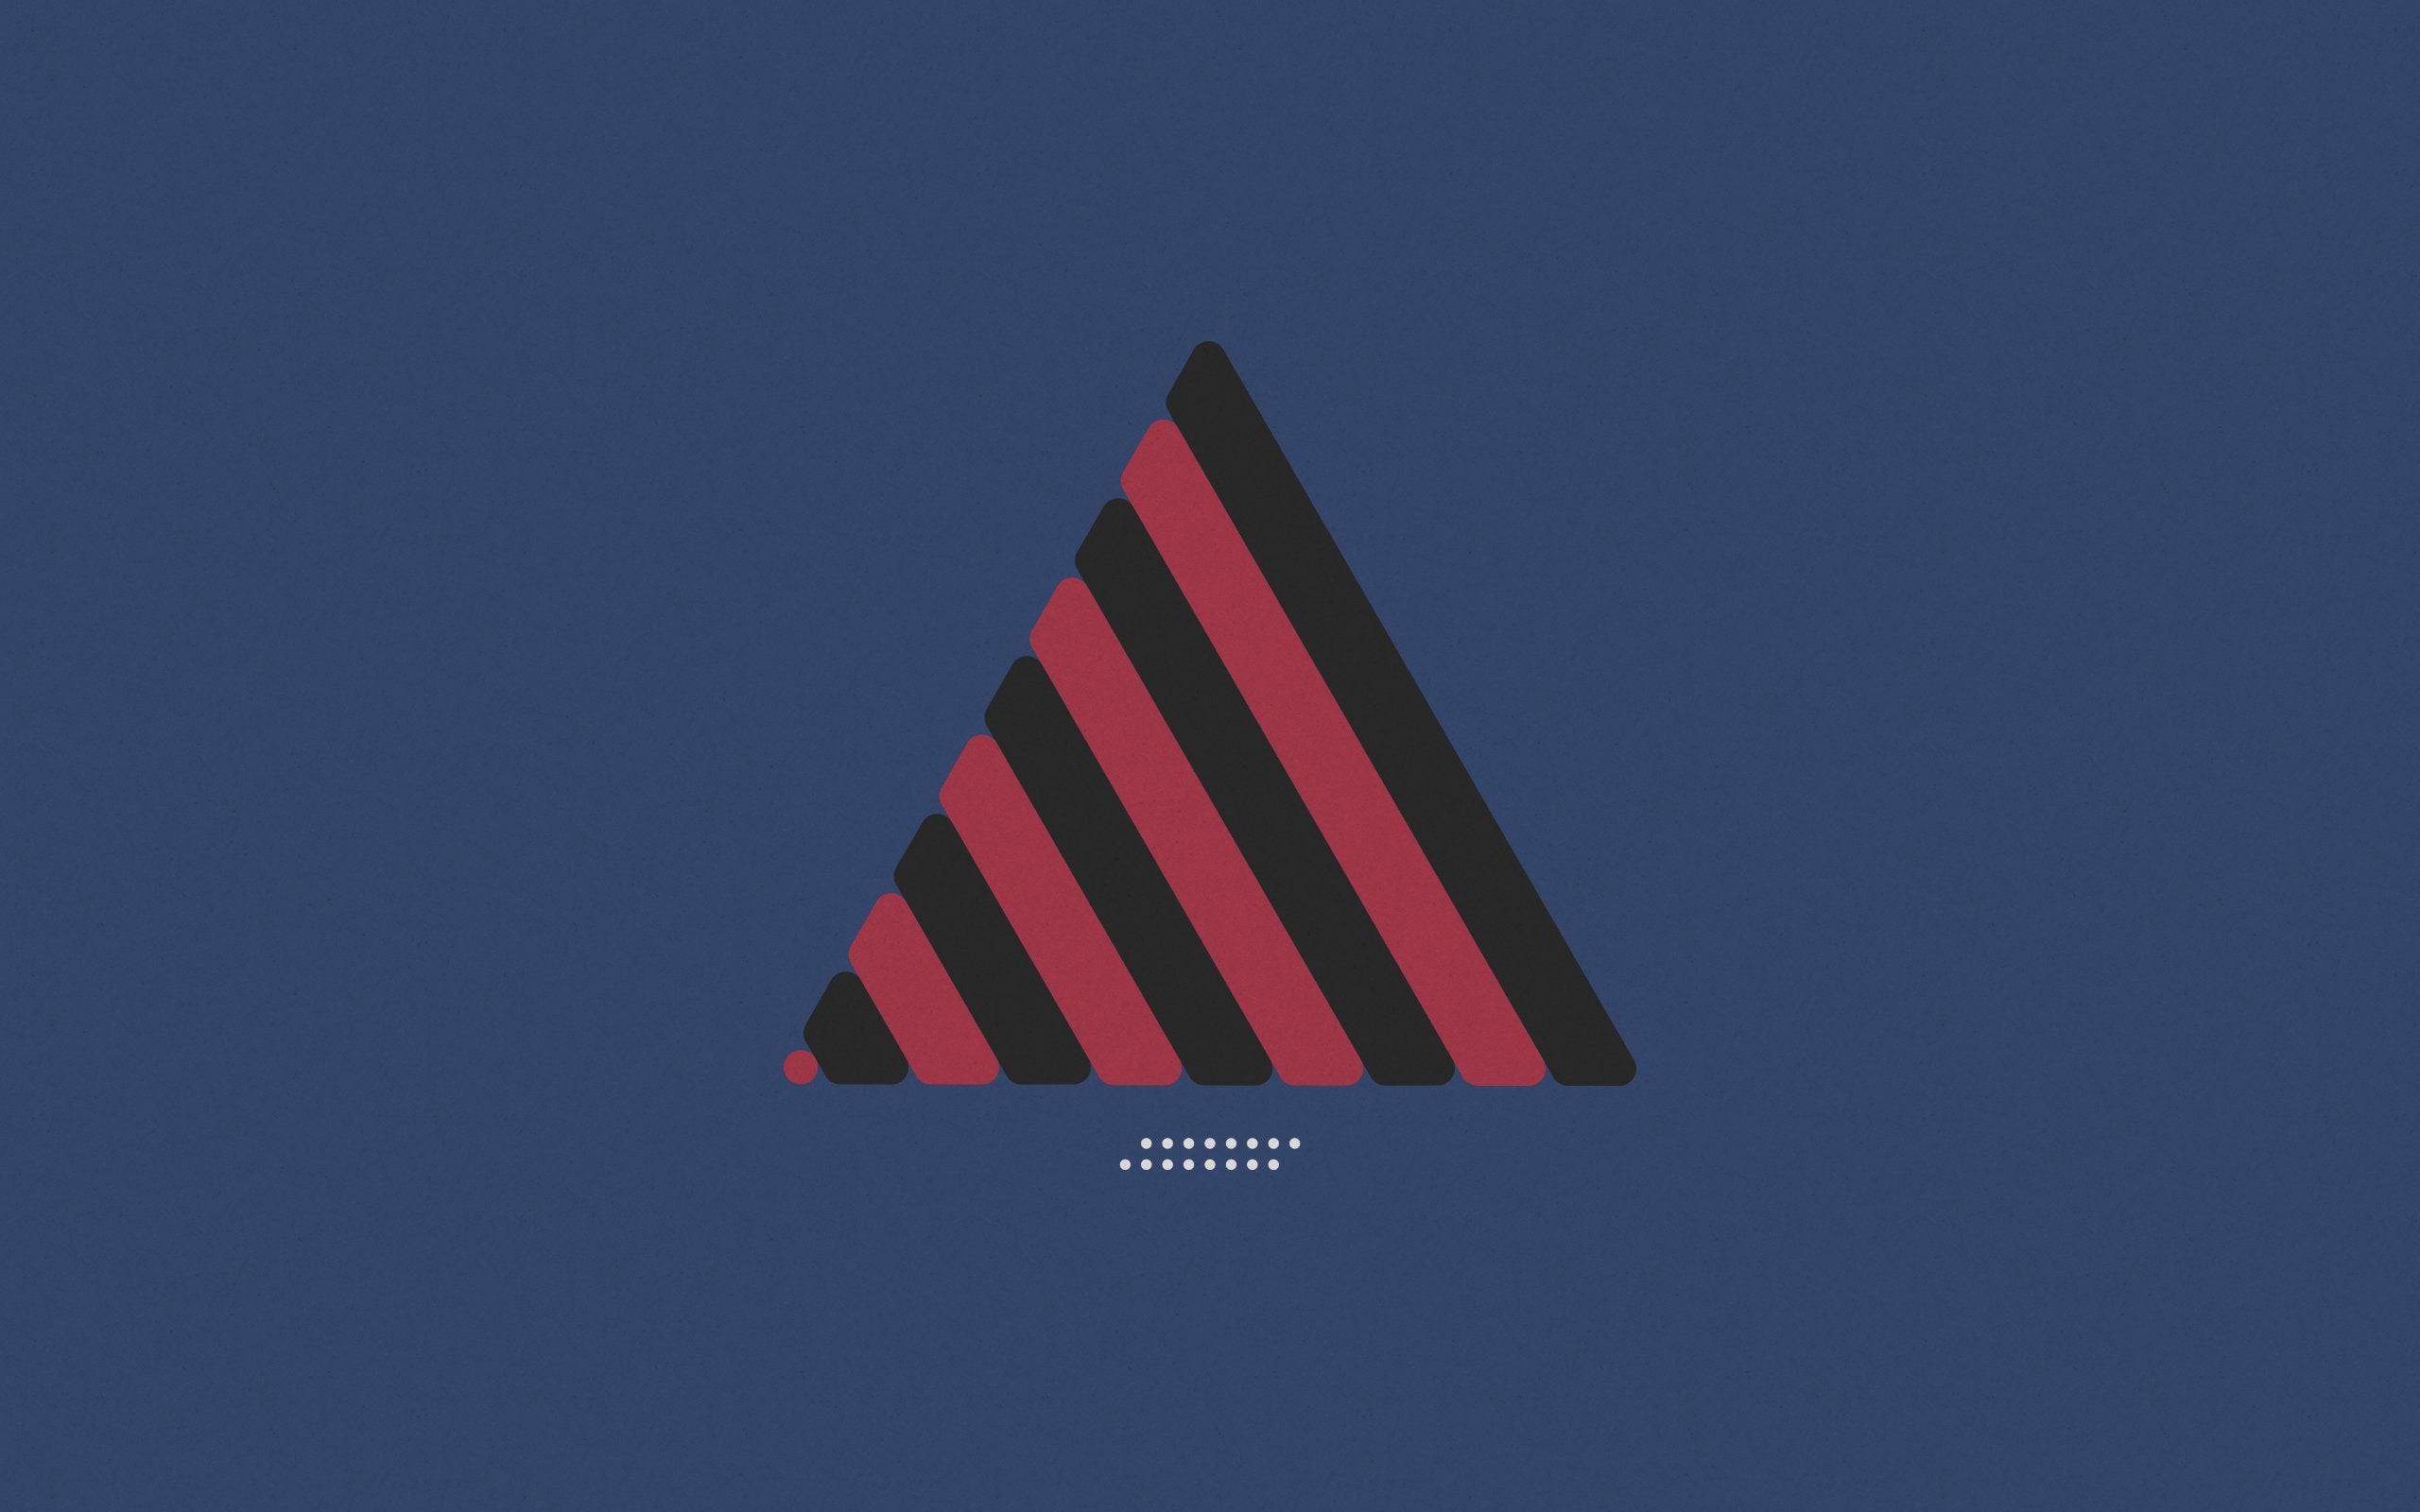 Iso50 Inspired Triangle Wallpaper